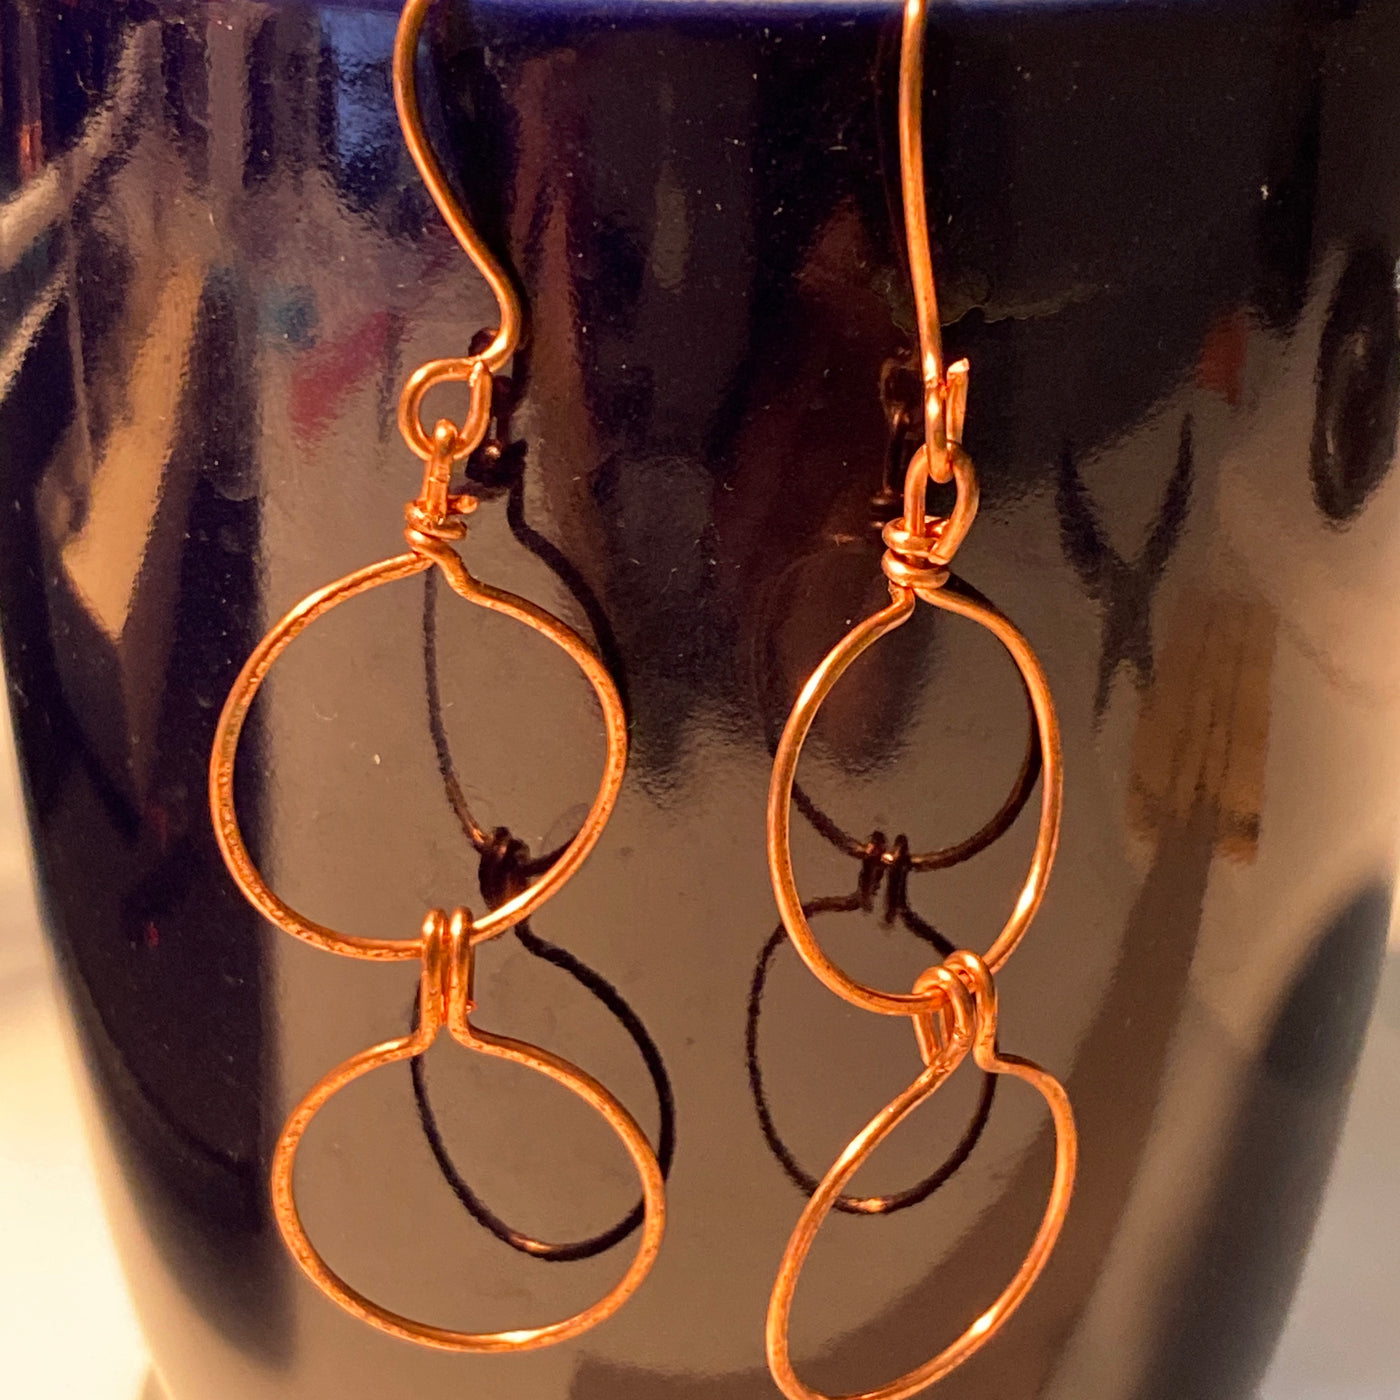 Earrings. Only copper wire. Lines collection.